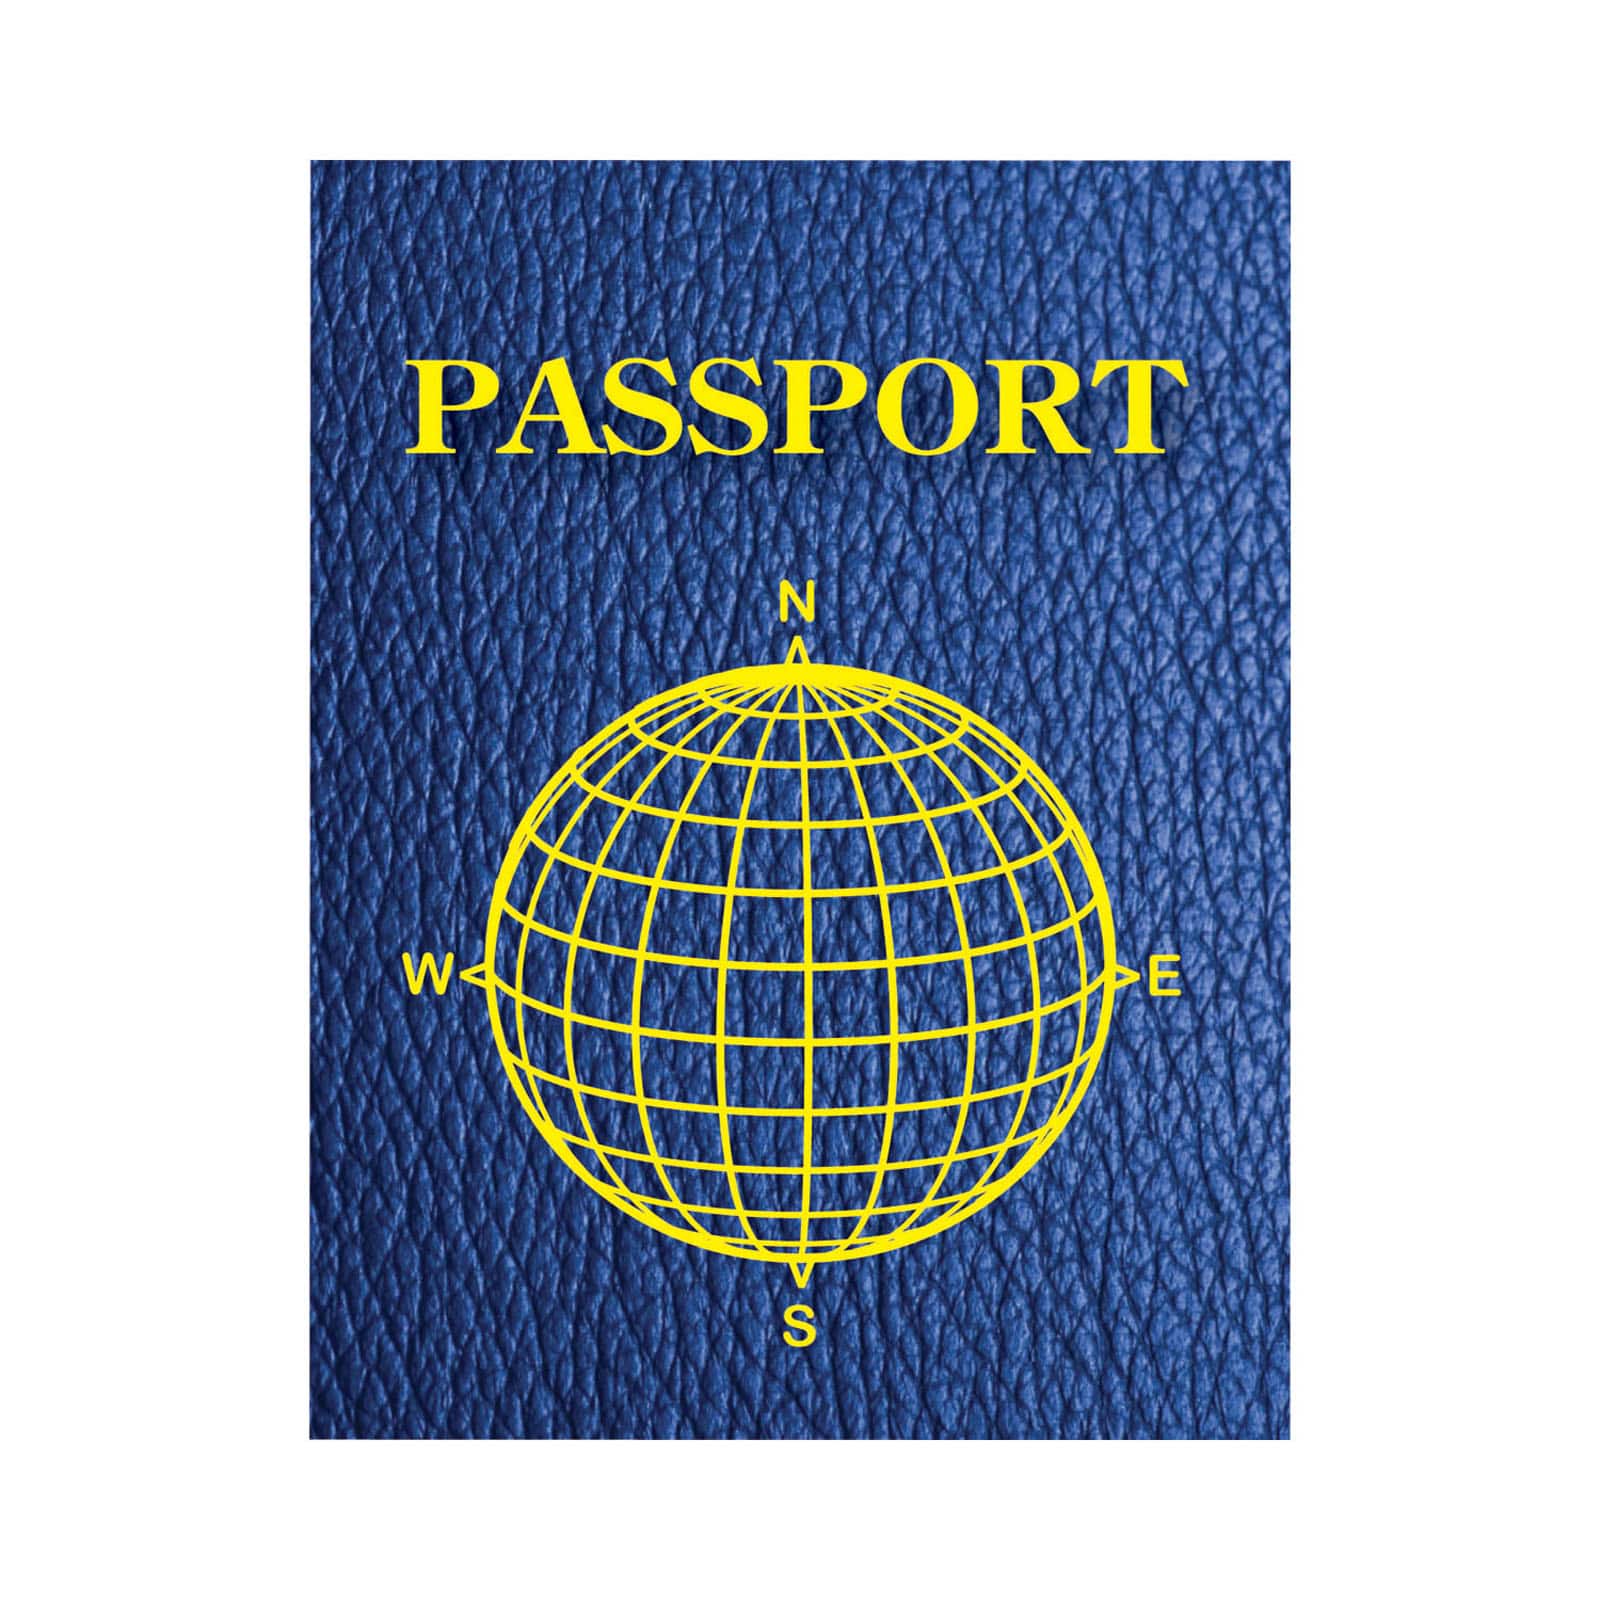 50 Packs: 12 ct. (60 total) Ashley Productions Blank Passports